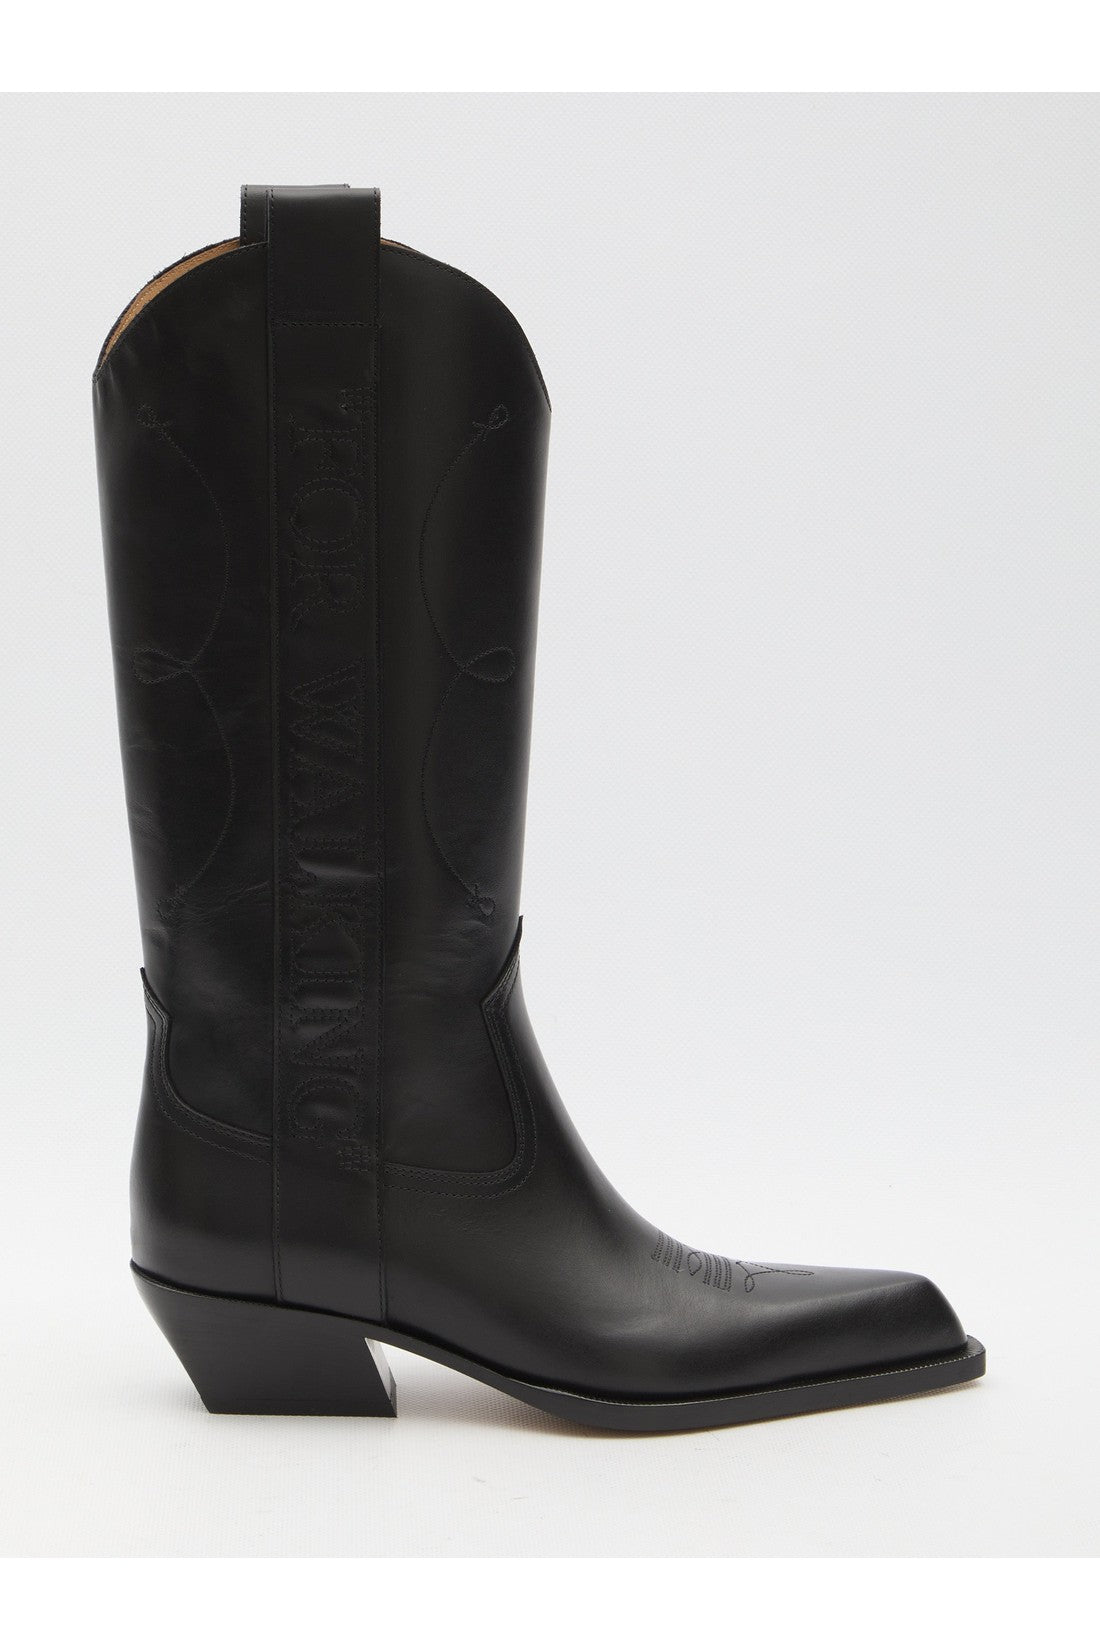 OFF-WHITE-OUTLET-SALE-For-Walking-Texan-boots-Stiefel-Stiefeletten-36-BLACK-ARCHIVE-COLLECTION.jpg